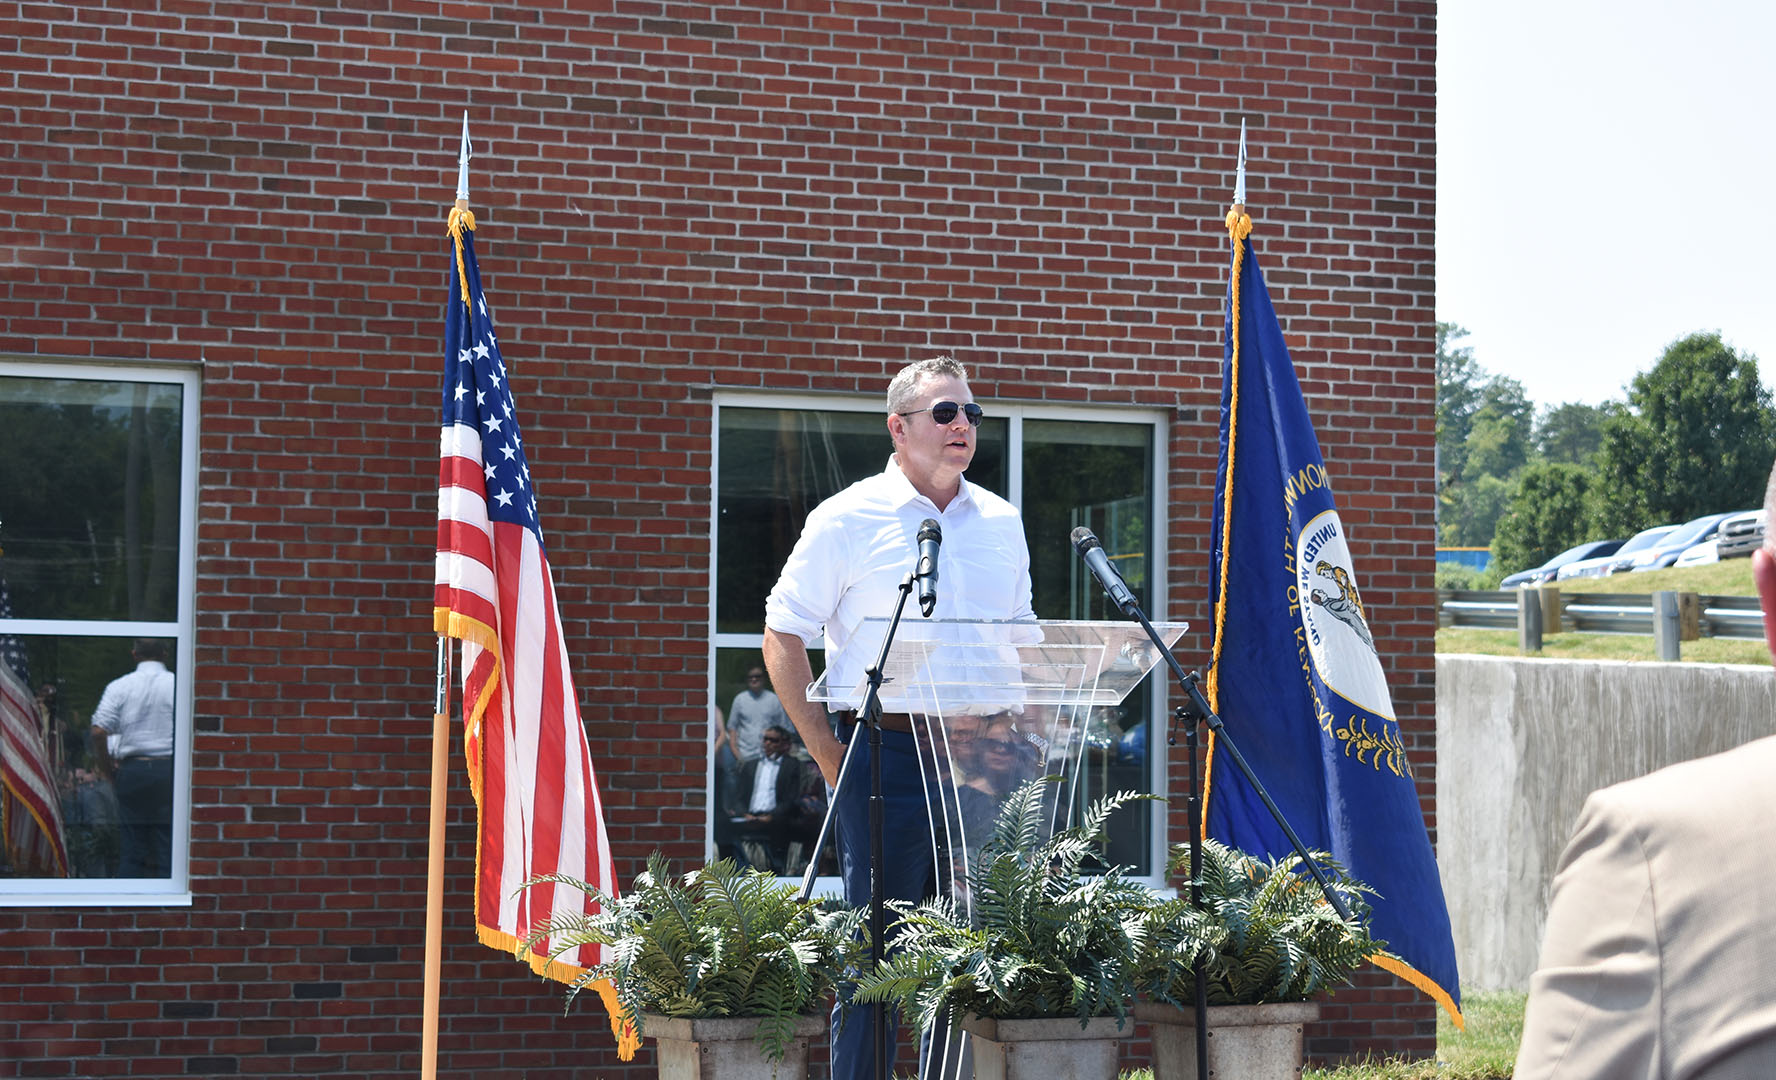 A man stands in front of a building at a podium, speaking.